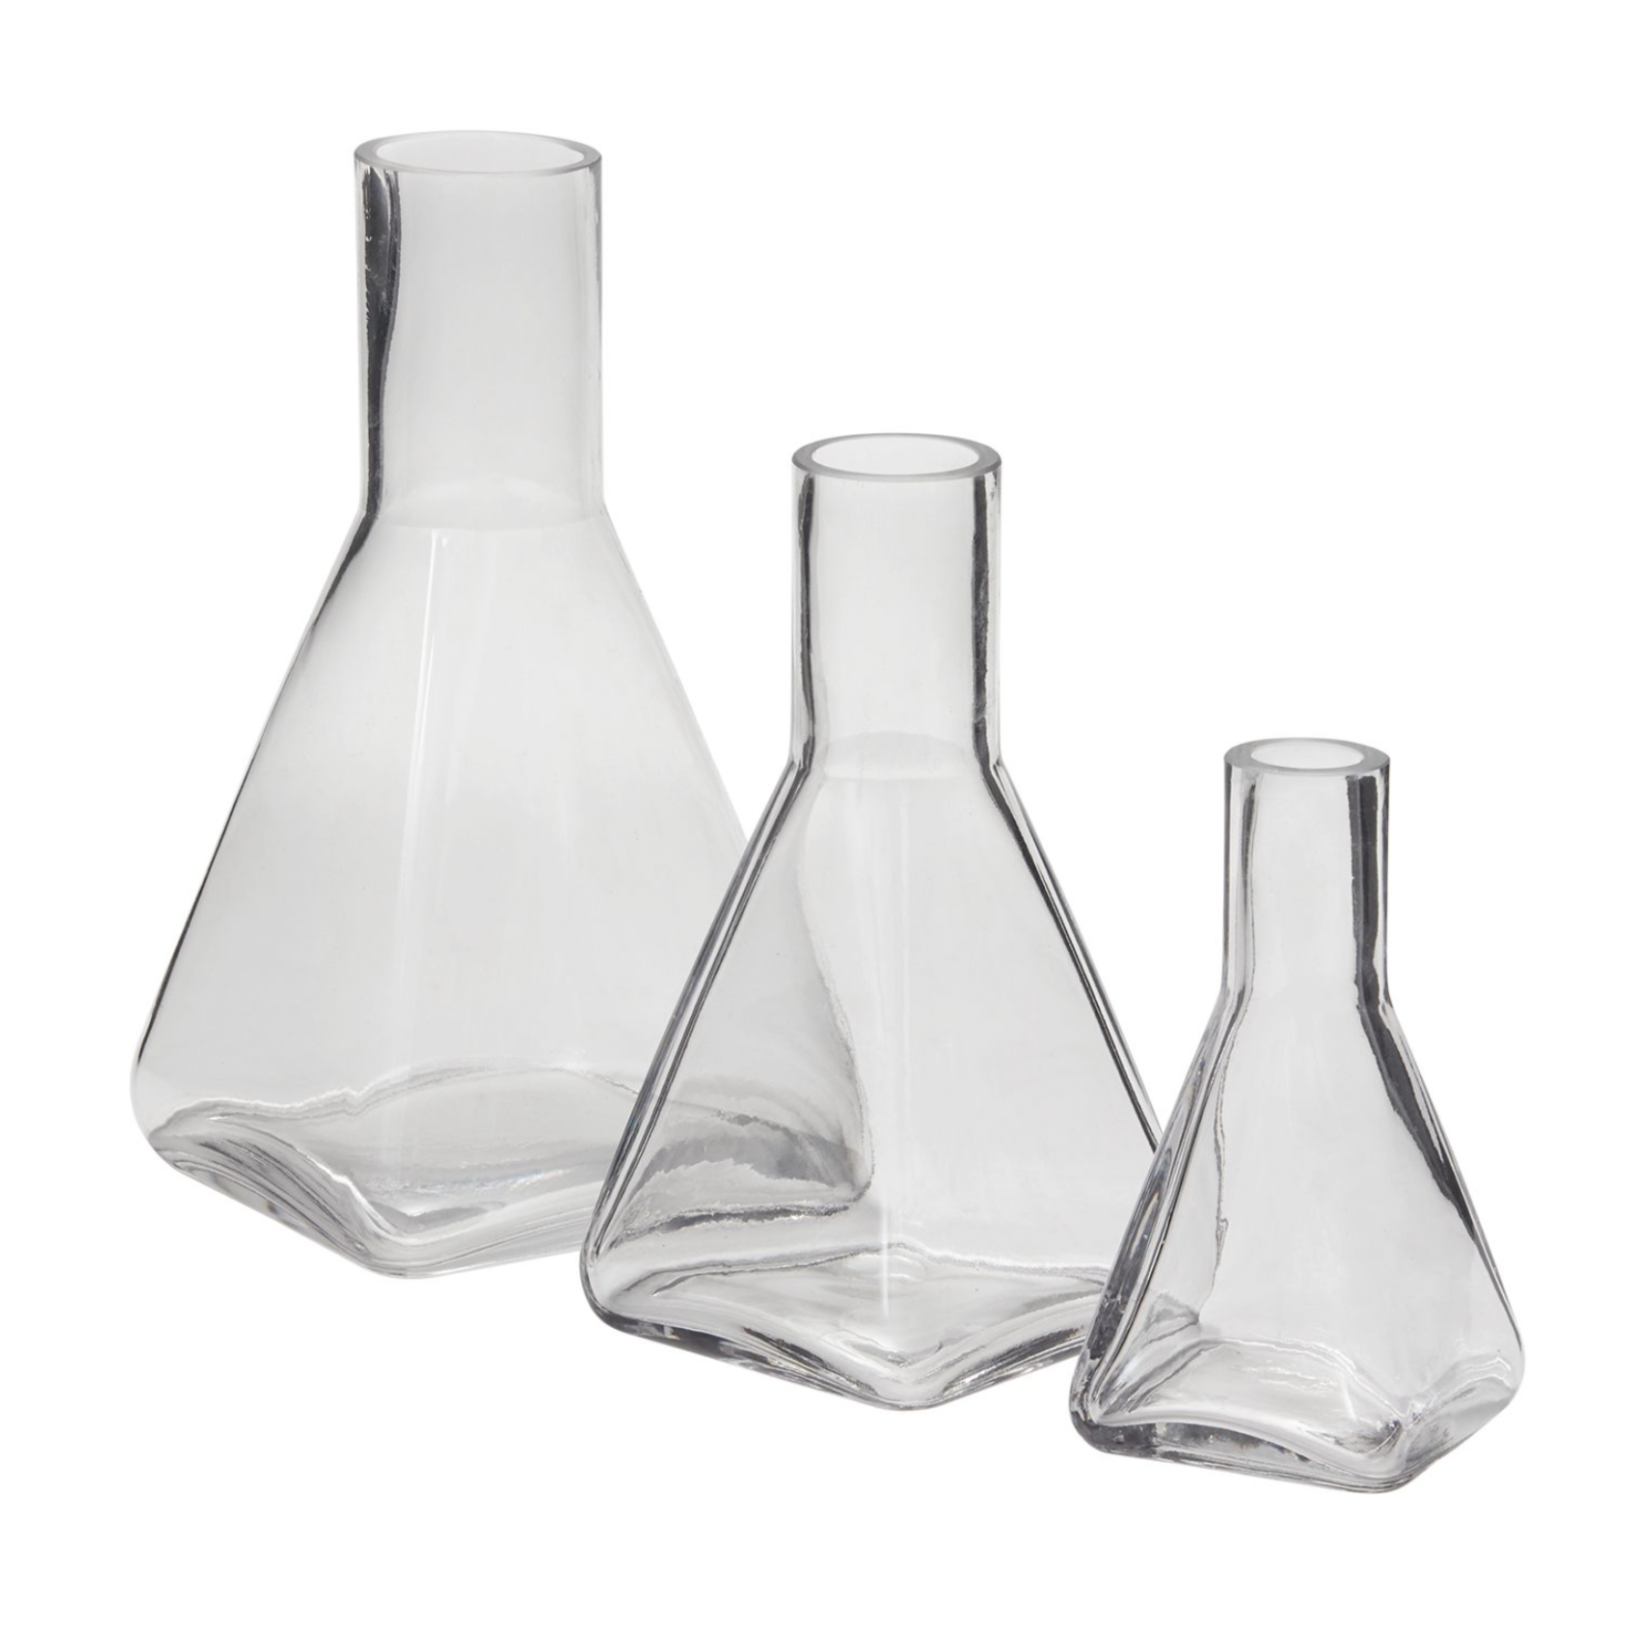 50% off was $19  now $9.50, 10”H X 5.5” GLASS CHICORY BUDVASE